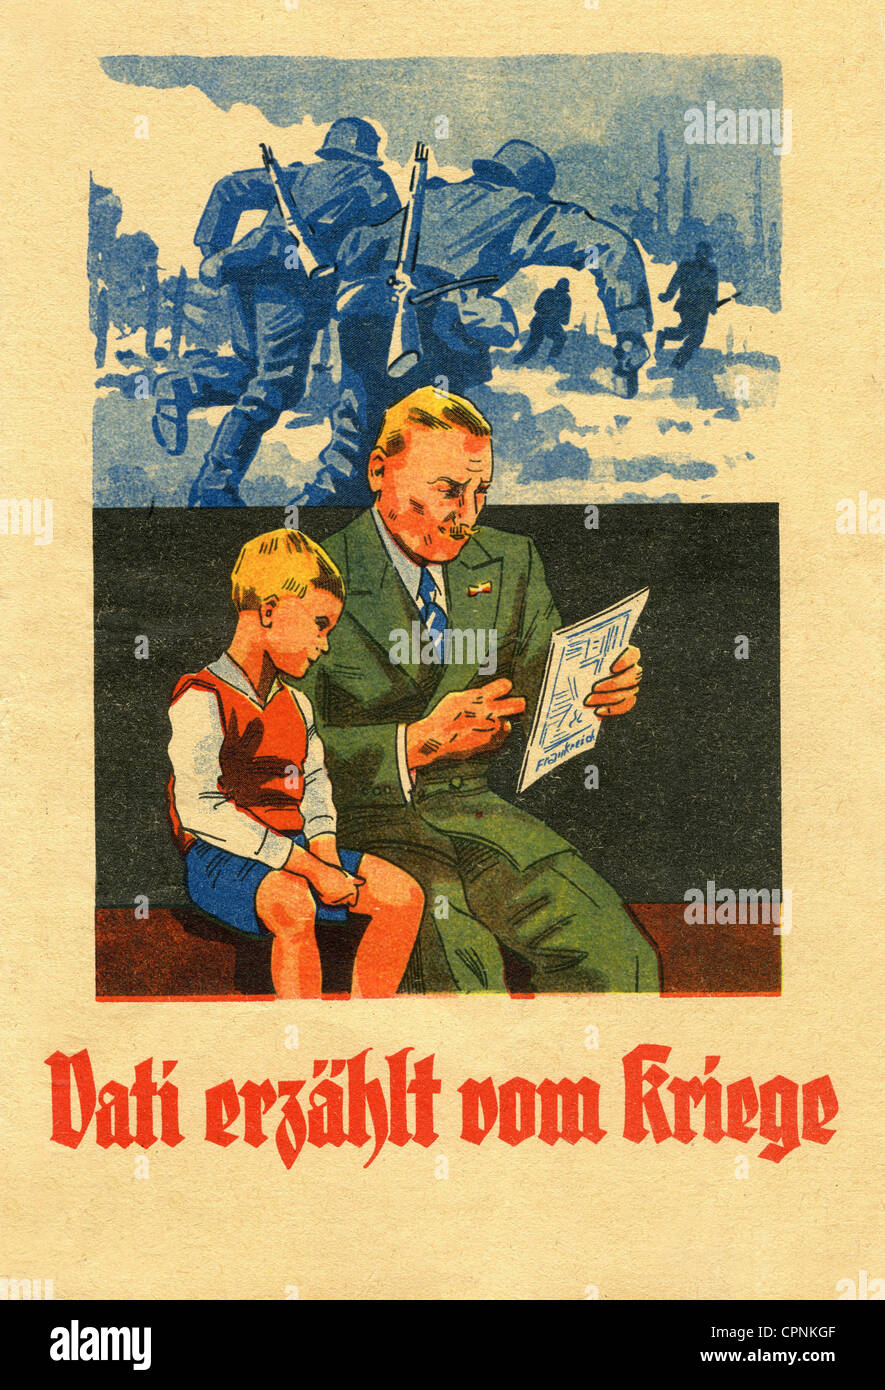 pedagogy, parental home, 'Vati erzaehlt vom Kriege' (father is telling about the war), small brochure, with those the wartime experiences of the father from the first world war should be told with illustrations to the children at that time, Germany, circa 1932, Additional-Rights-Clearences-Not Available Stock Photo